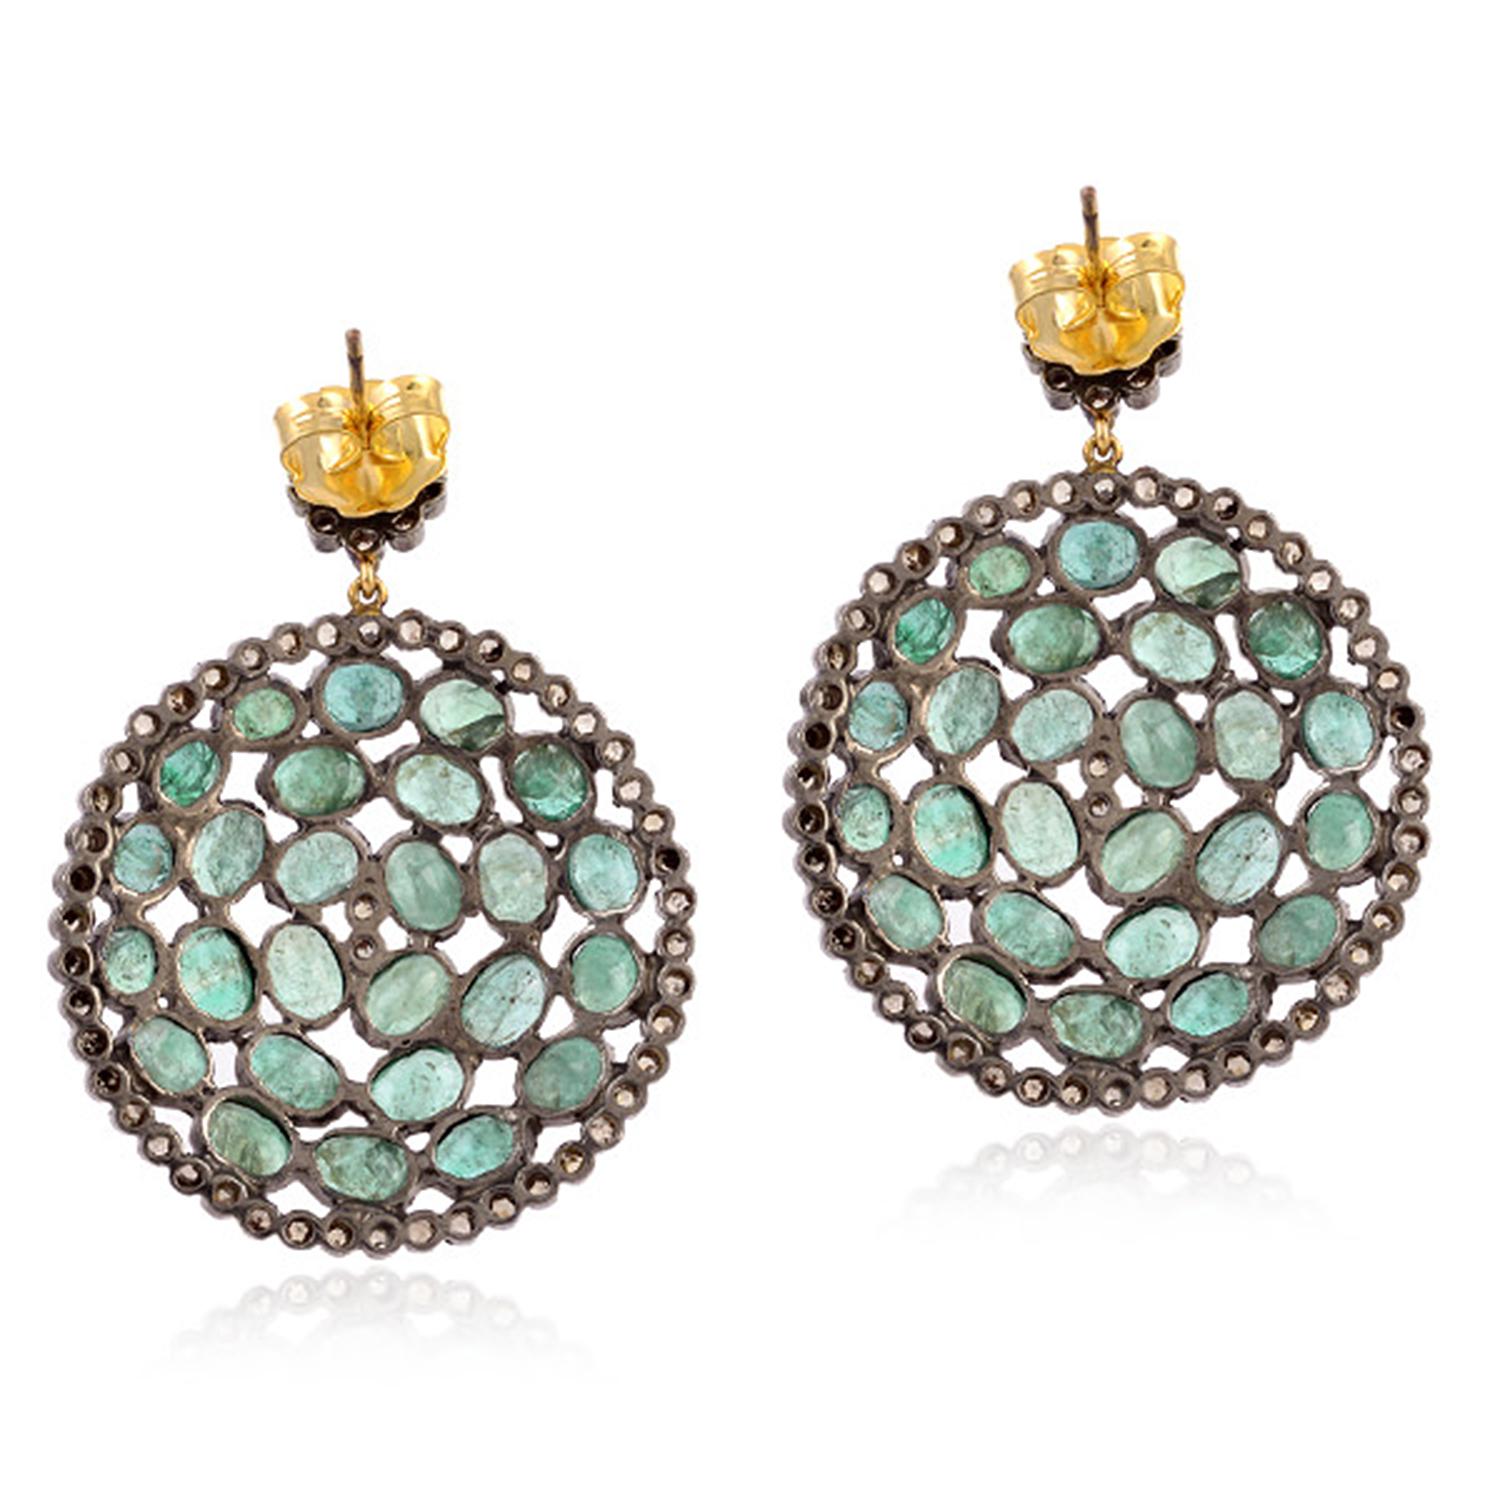 14kt:1.42gms,
Diamond:3.34cts,
Silver:12.88gms,
Emerald:23.00cts,
Size: 47X35MM